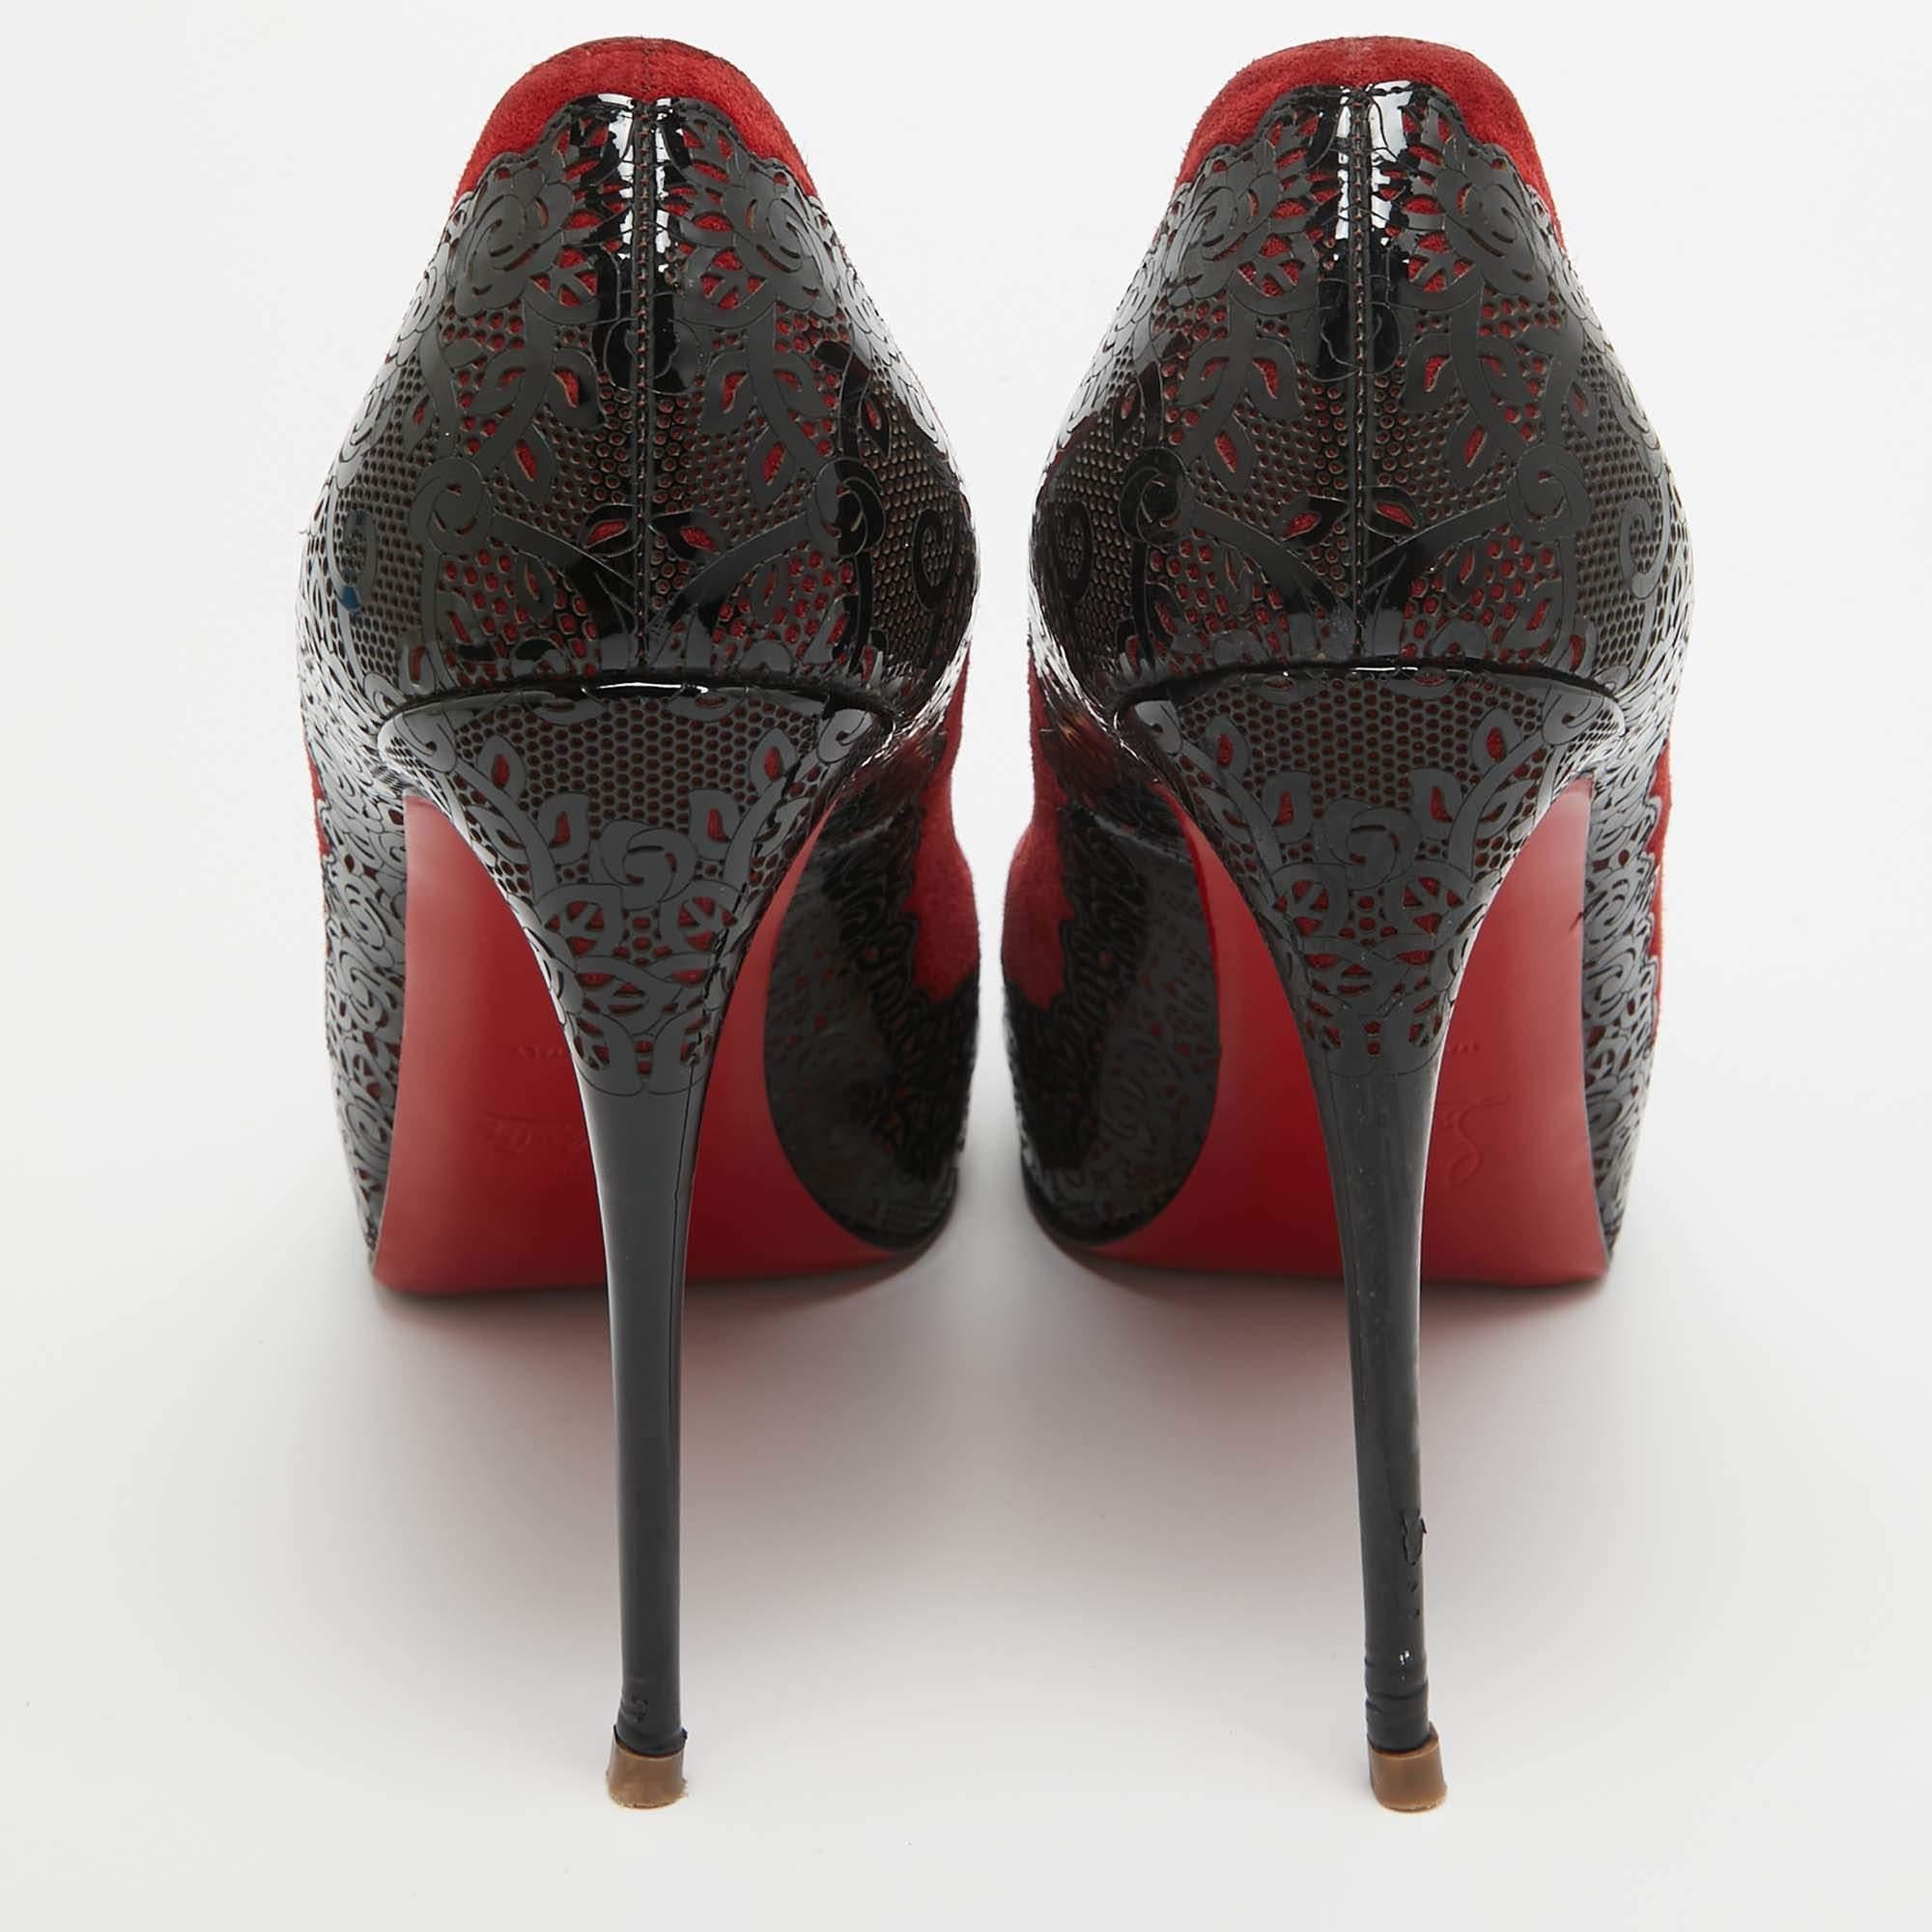 Christian Louboutin Red/Black Suede and Laser Cut Patent Veramucha Pumps Size 41 For Sale 1